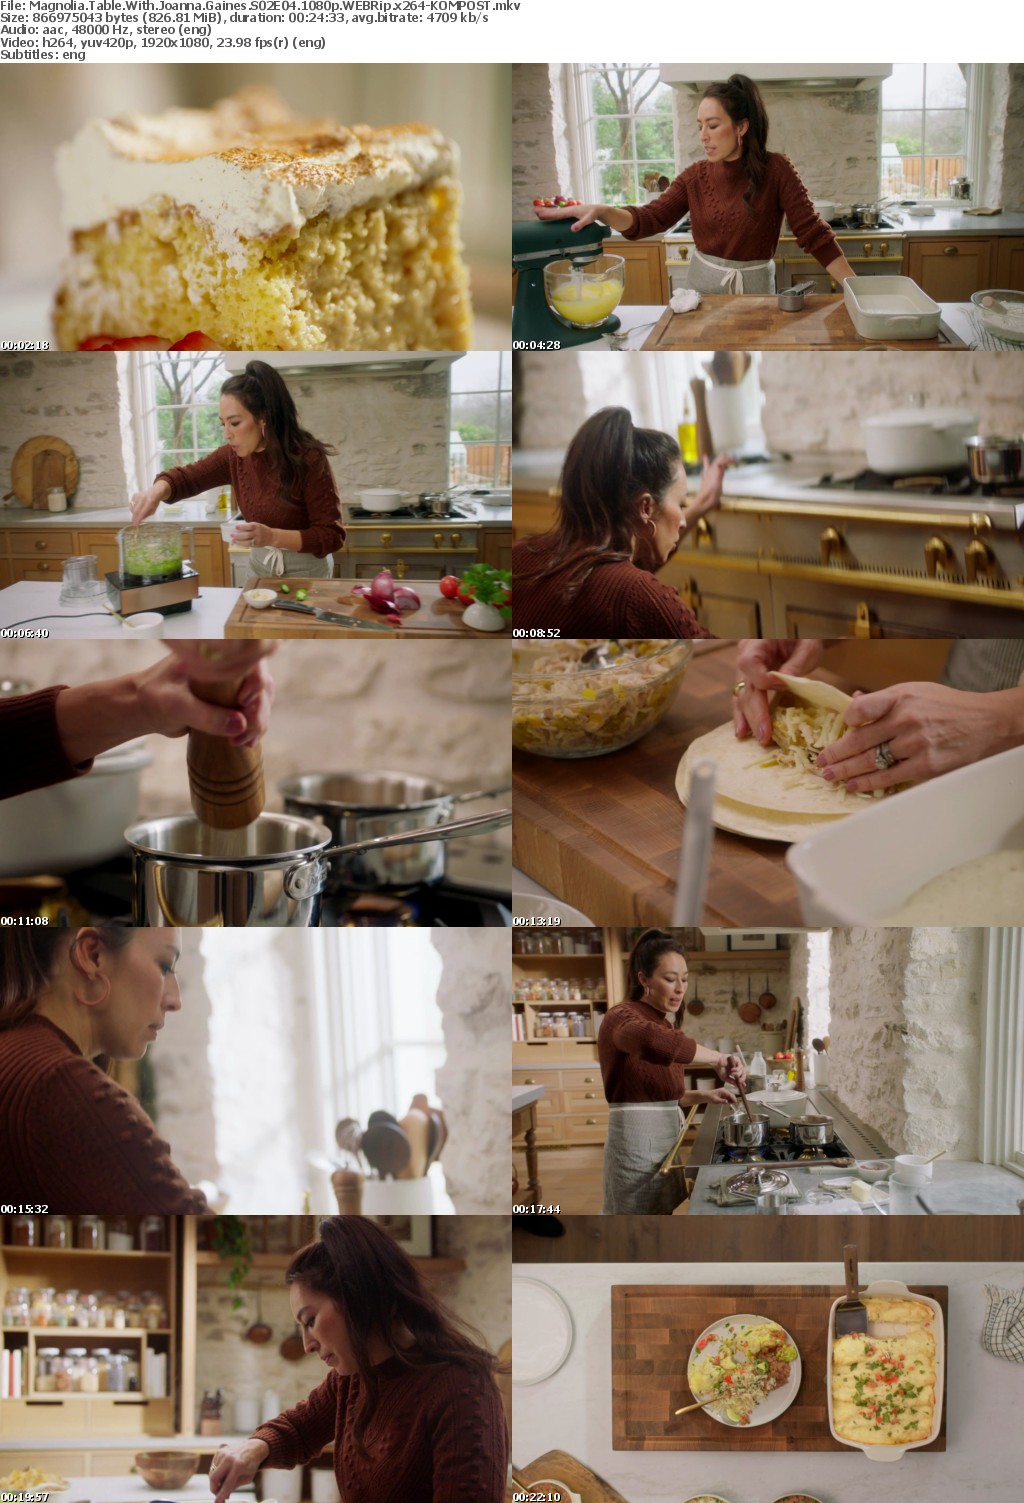 Magnolia Table With Joanna Gaines S02 1080p WEBRip AAC2 0 x264-KOMPOST